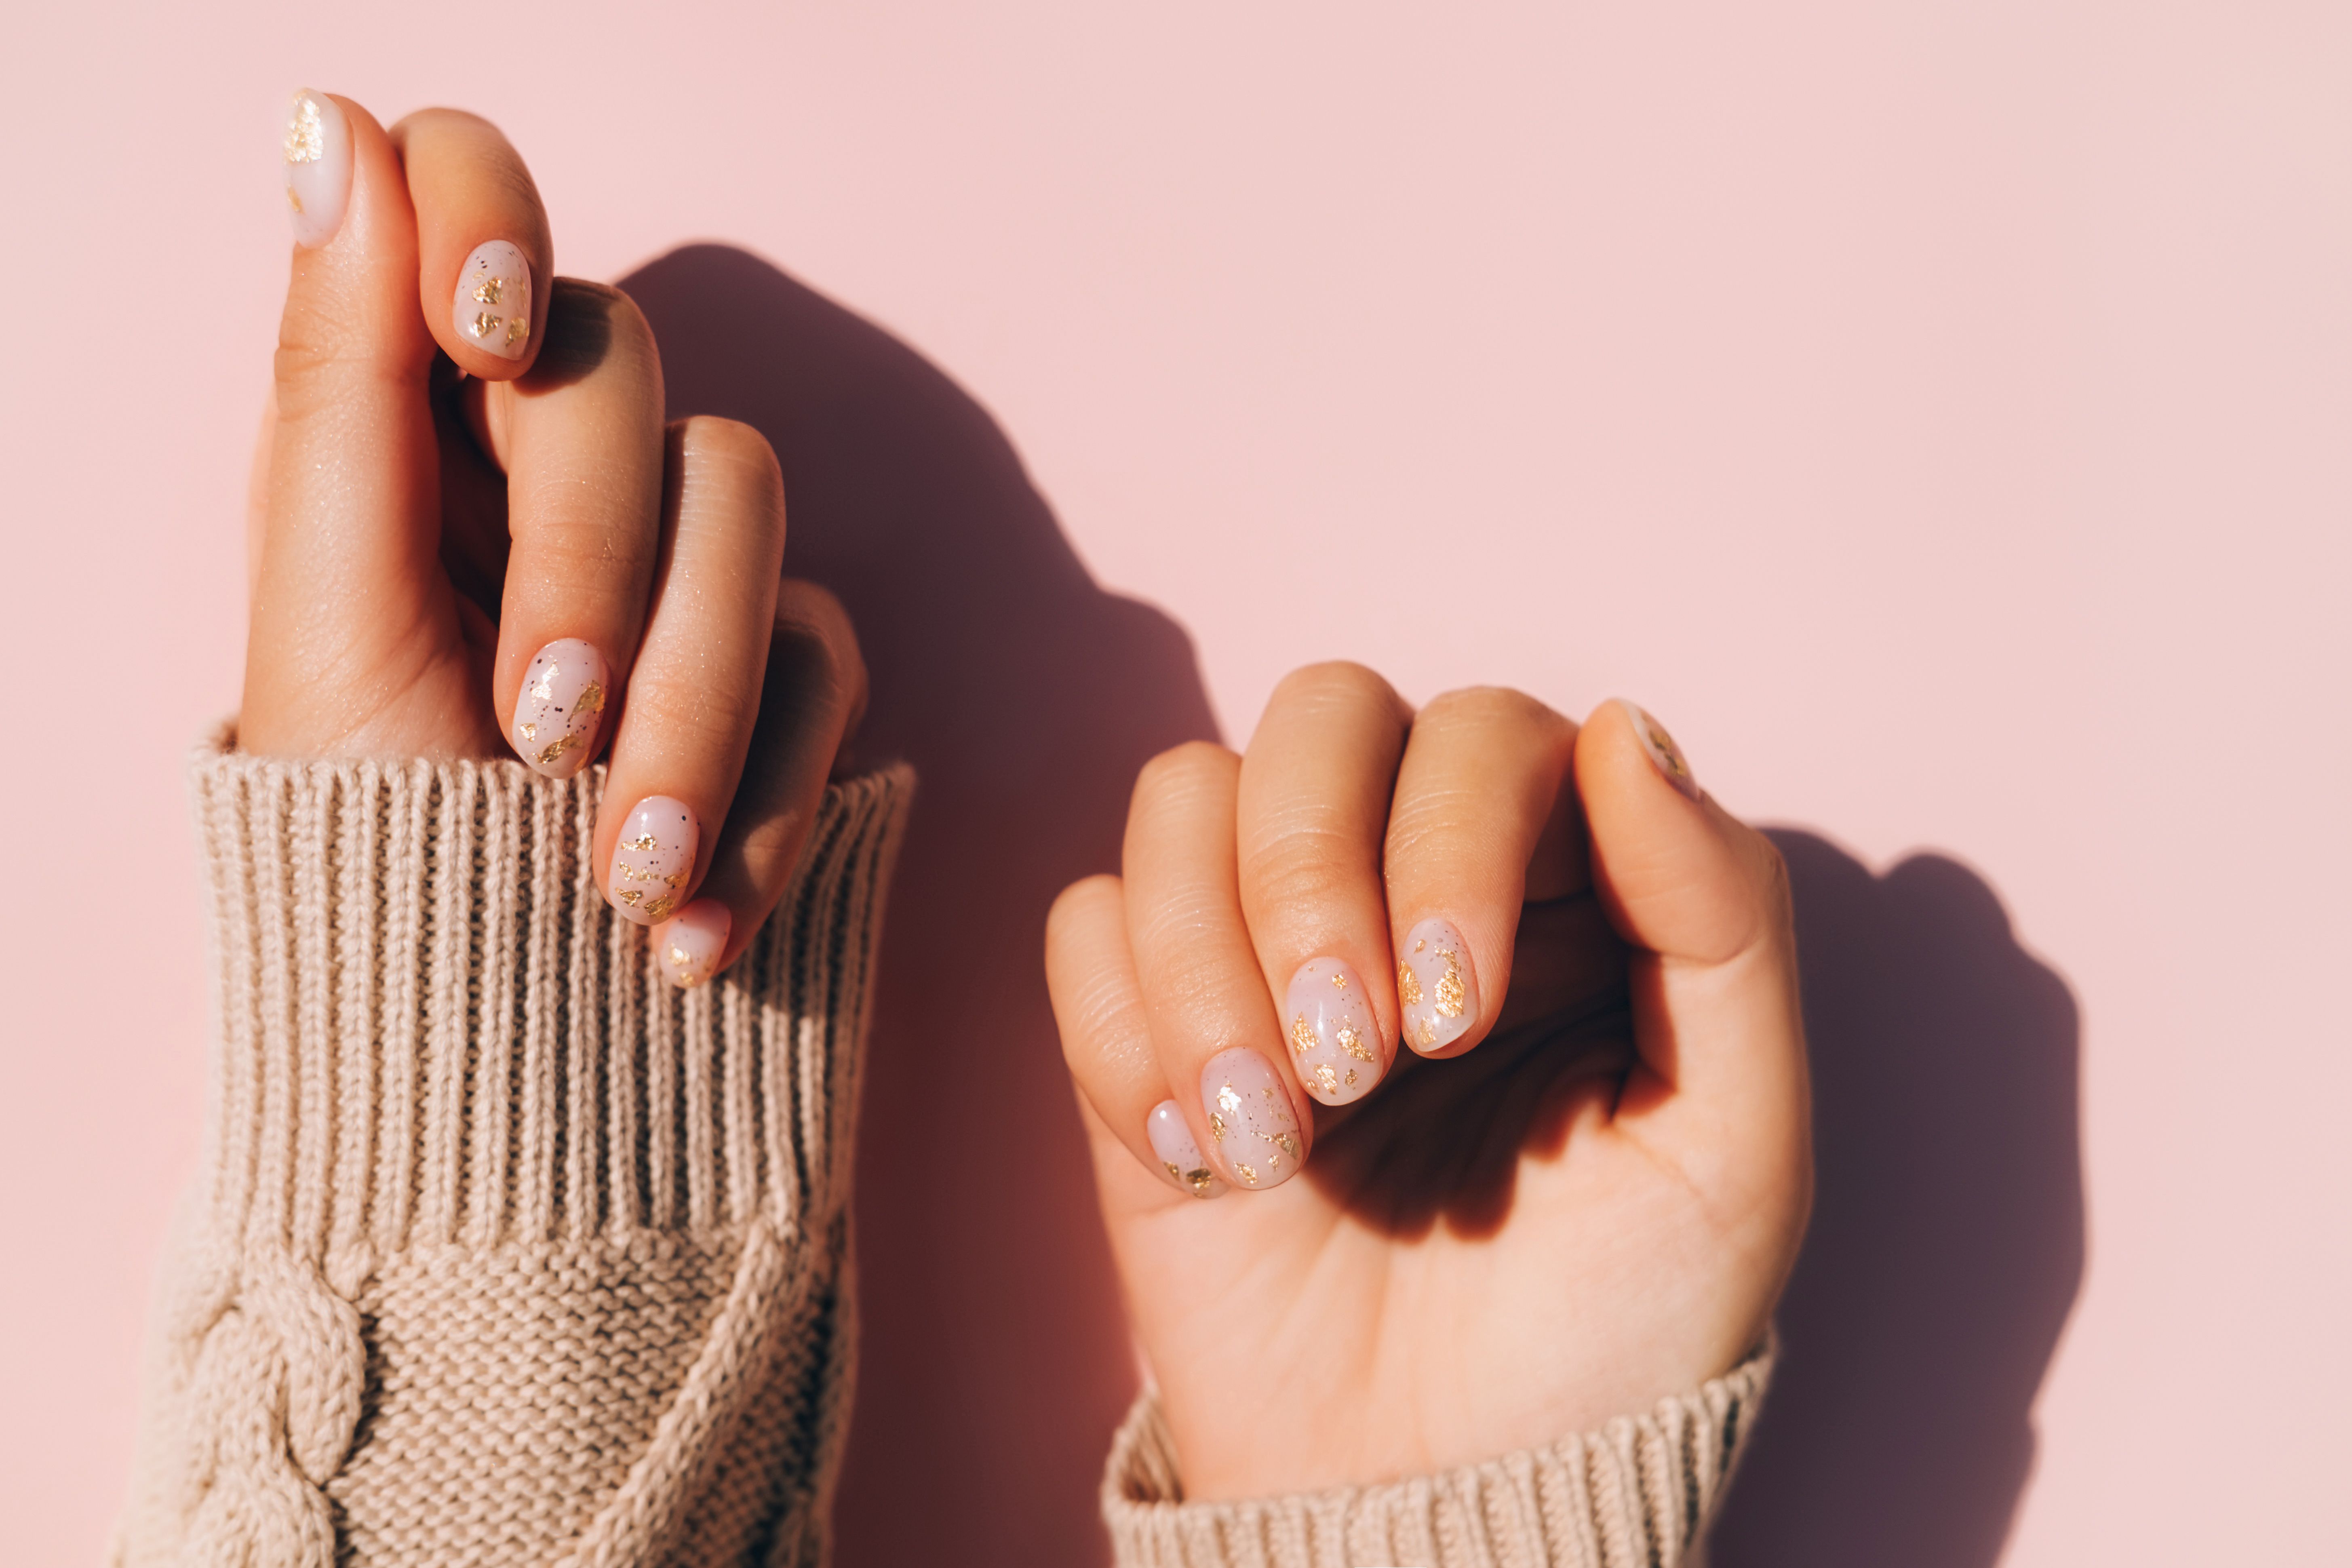 Shellac Nails: This nail trend will help your manicure last longer